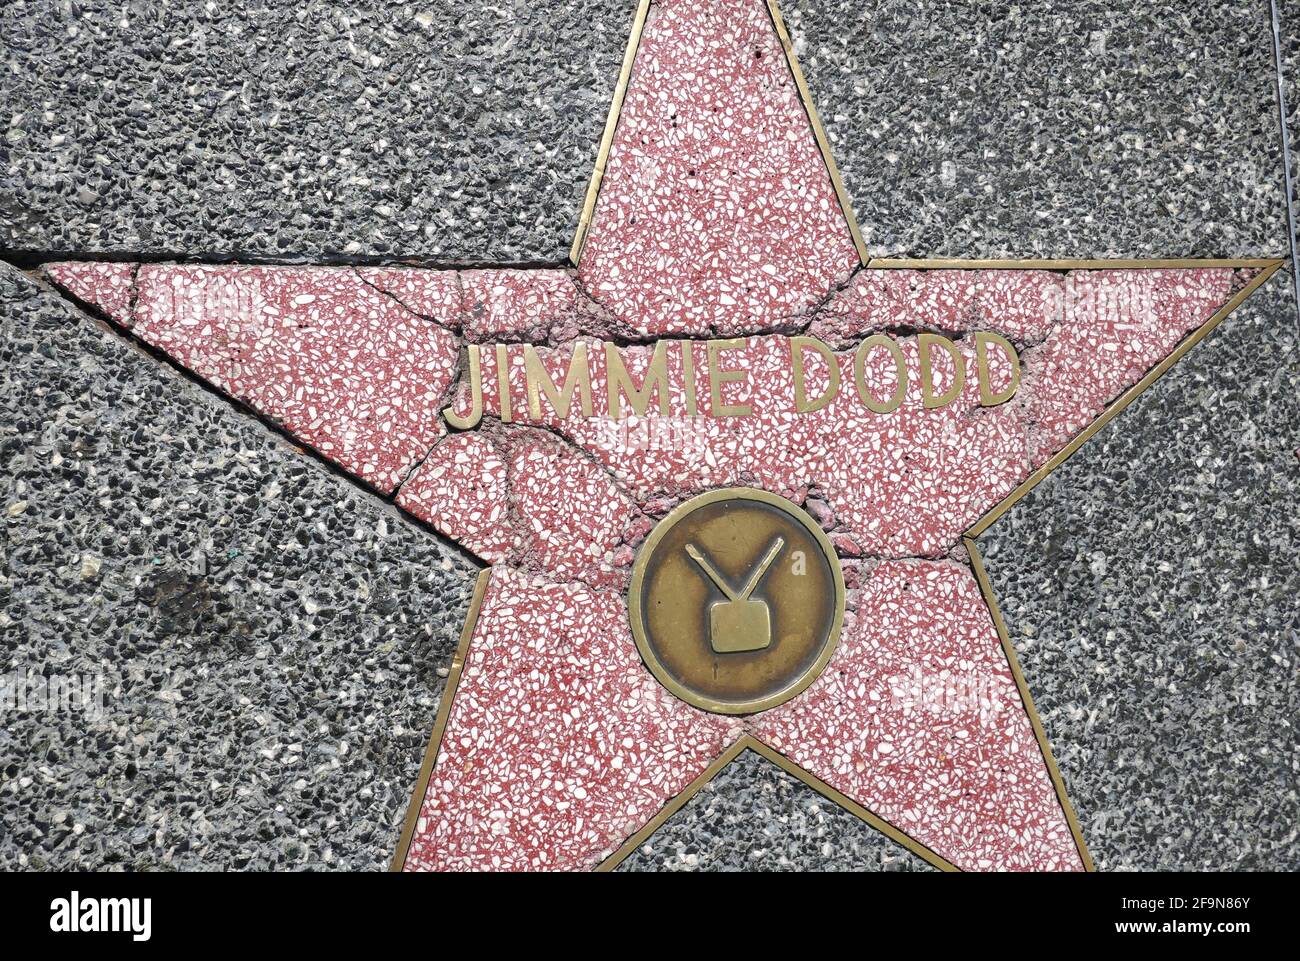 Hollywood, California, USA 17th April 2021 A general view of atmosphere of  actor Jimmie Dodd's Star on the Hollywood Walk of Fame on April 17, 2021 in  Hollywood, California, USA. Photo by